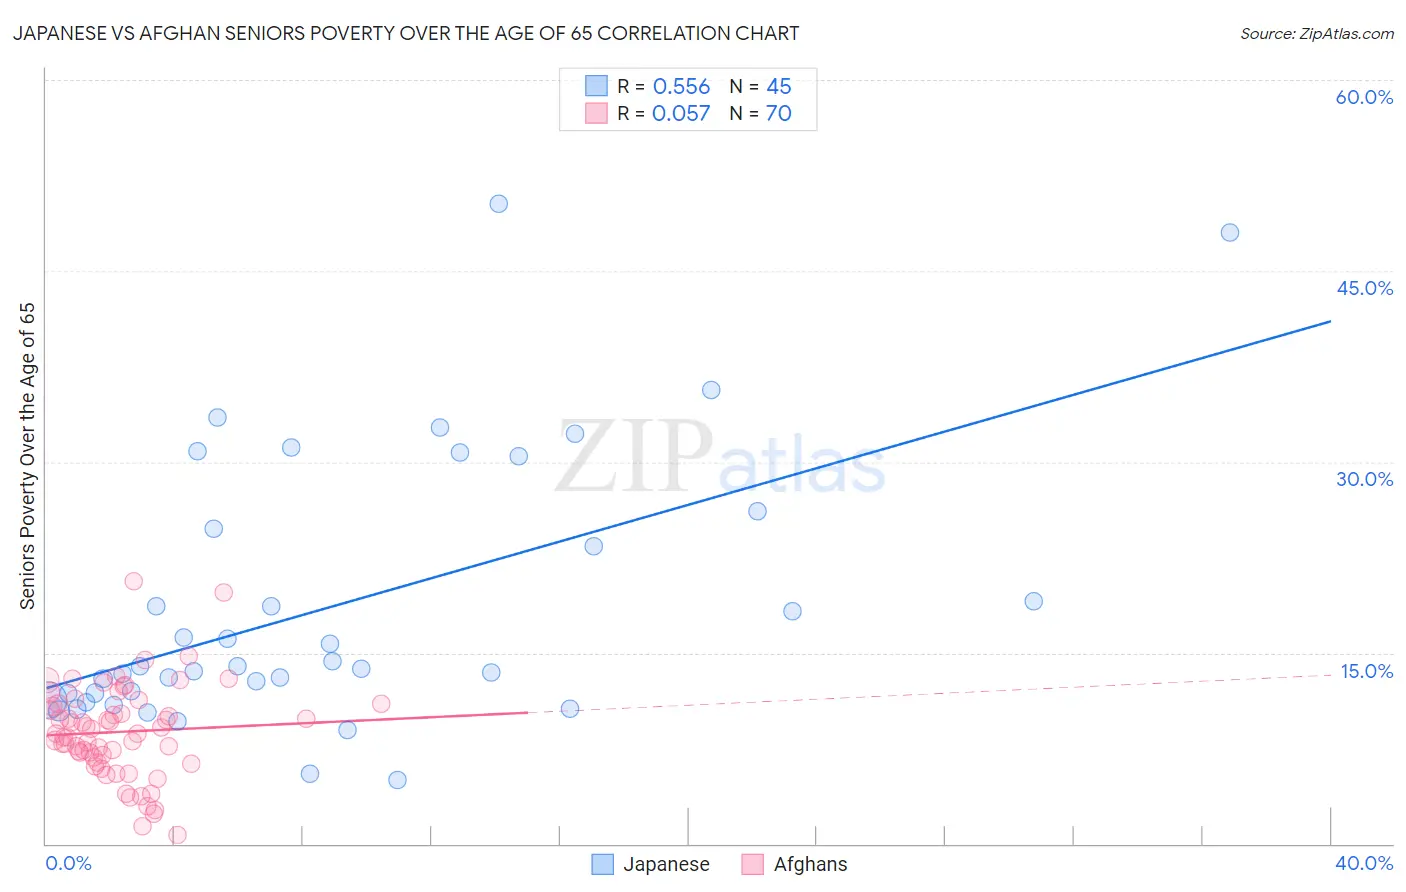 Japanese vs Afghan Seniors Poverty Over the Age of 65